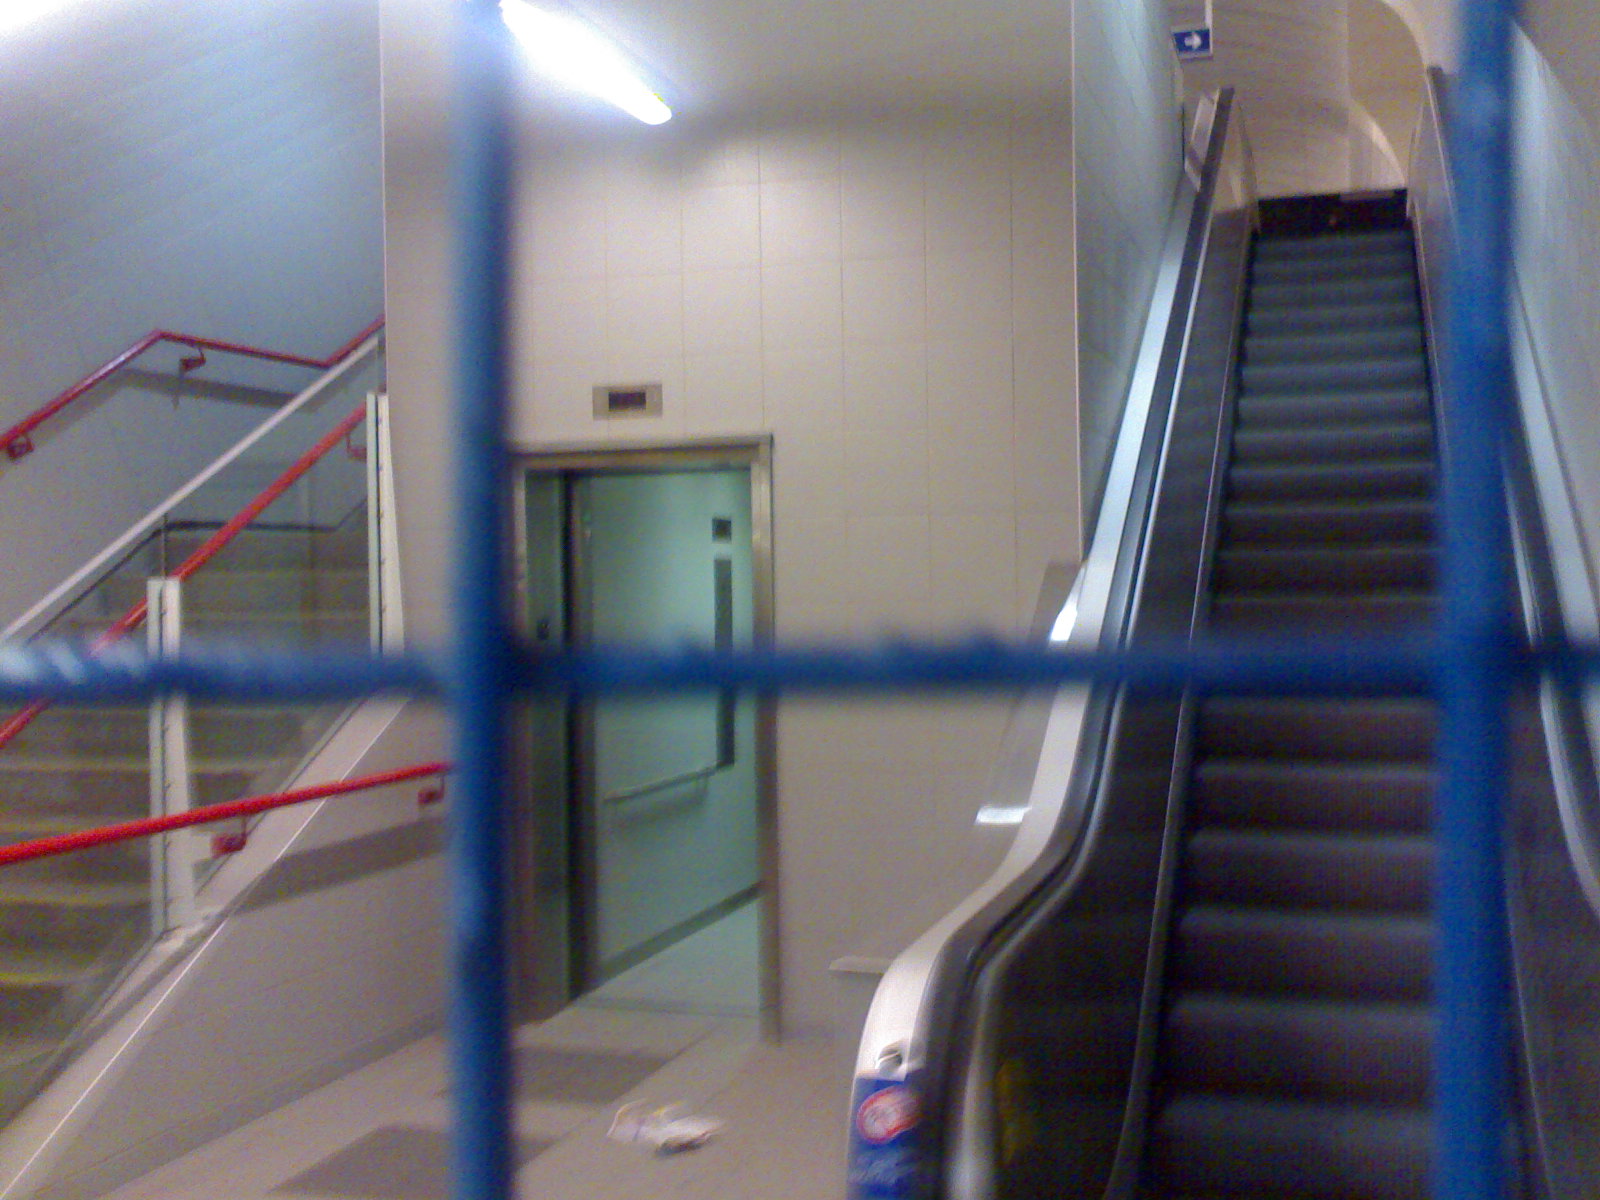 an escalator leading to a second story on the other side of the building